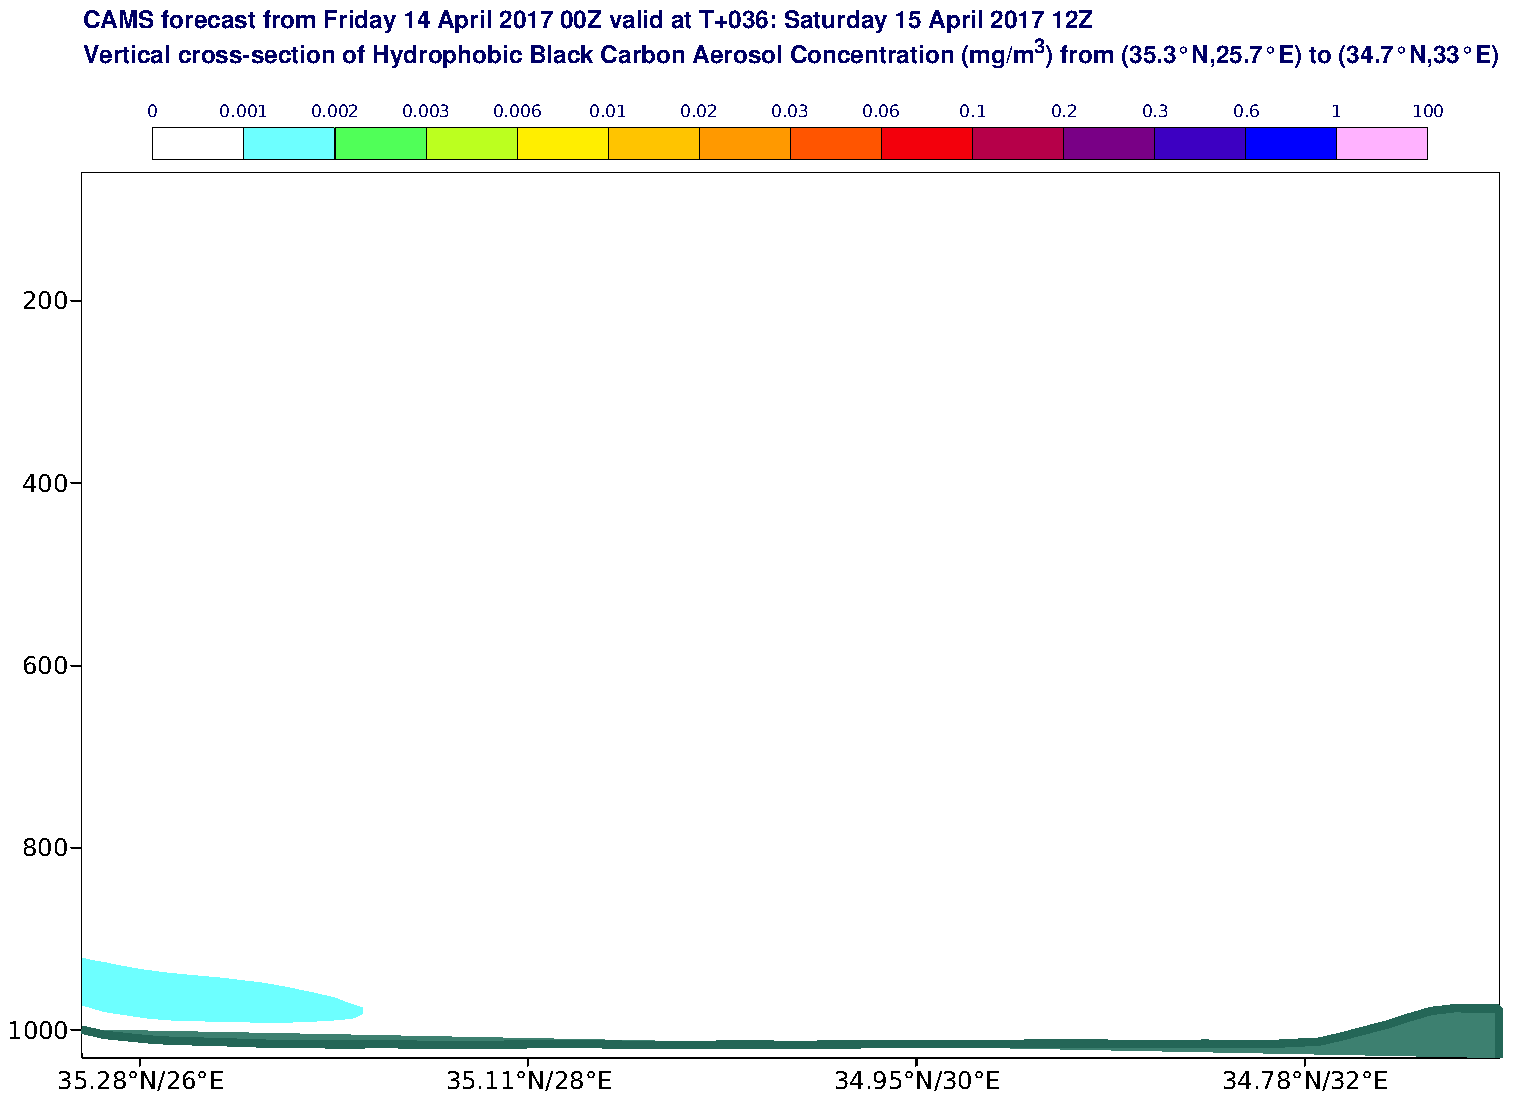 Vertical cross-section of Hydrophobic Black Carbon Aerosol Concentration (mg/m3) valid at T36 - 2017-04-15 12:00